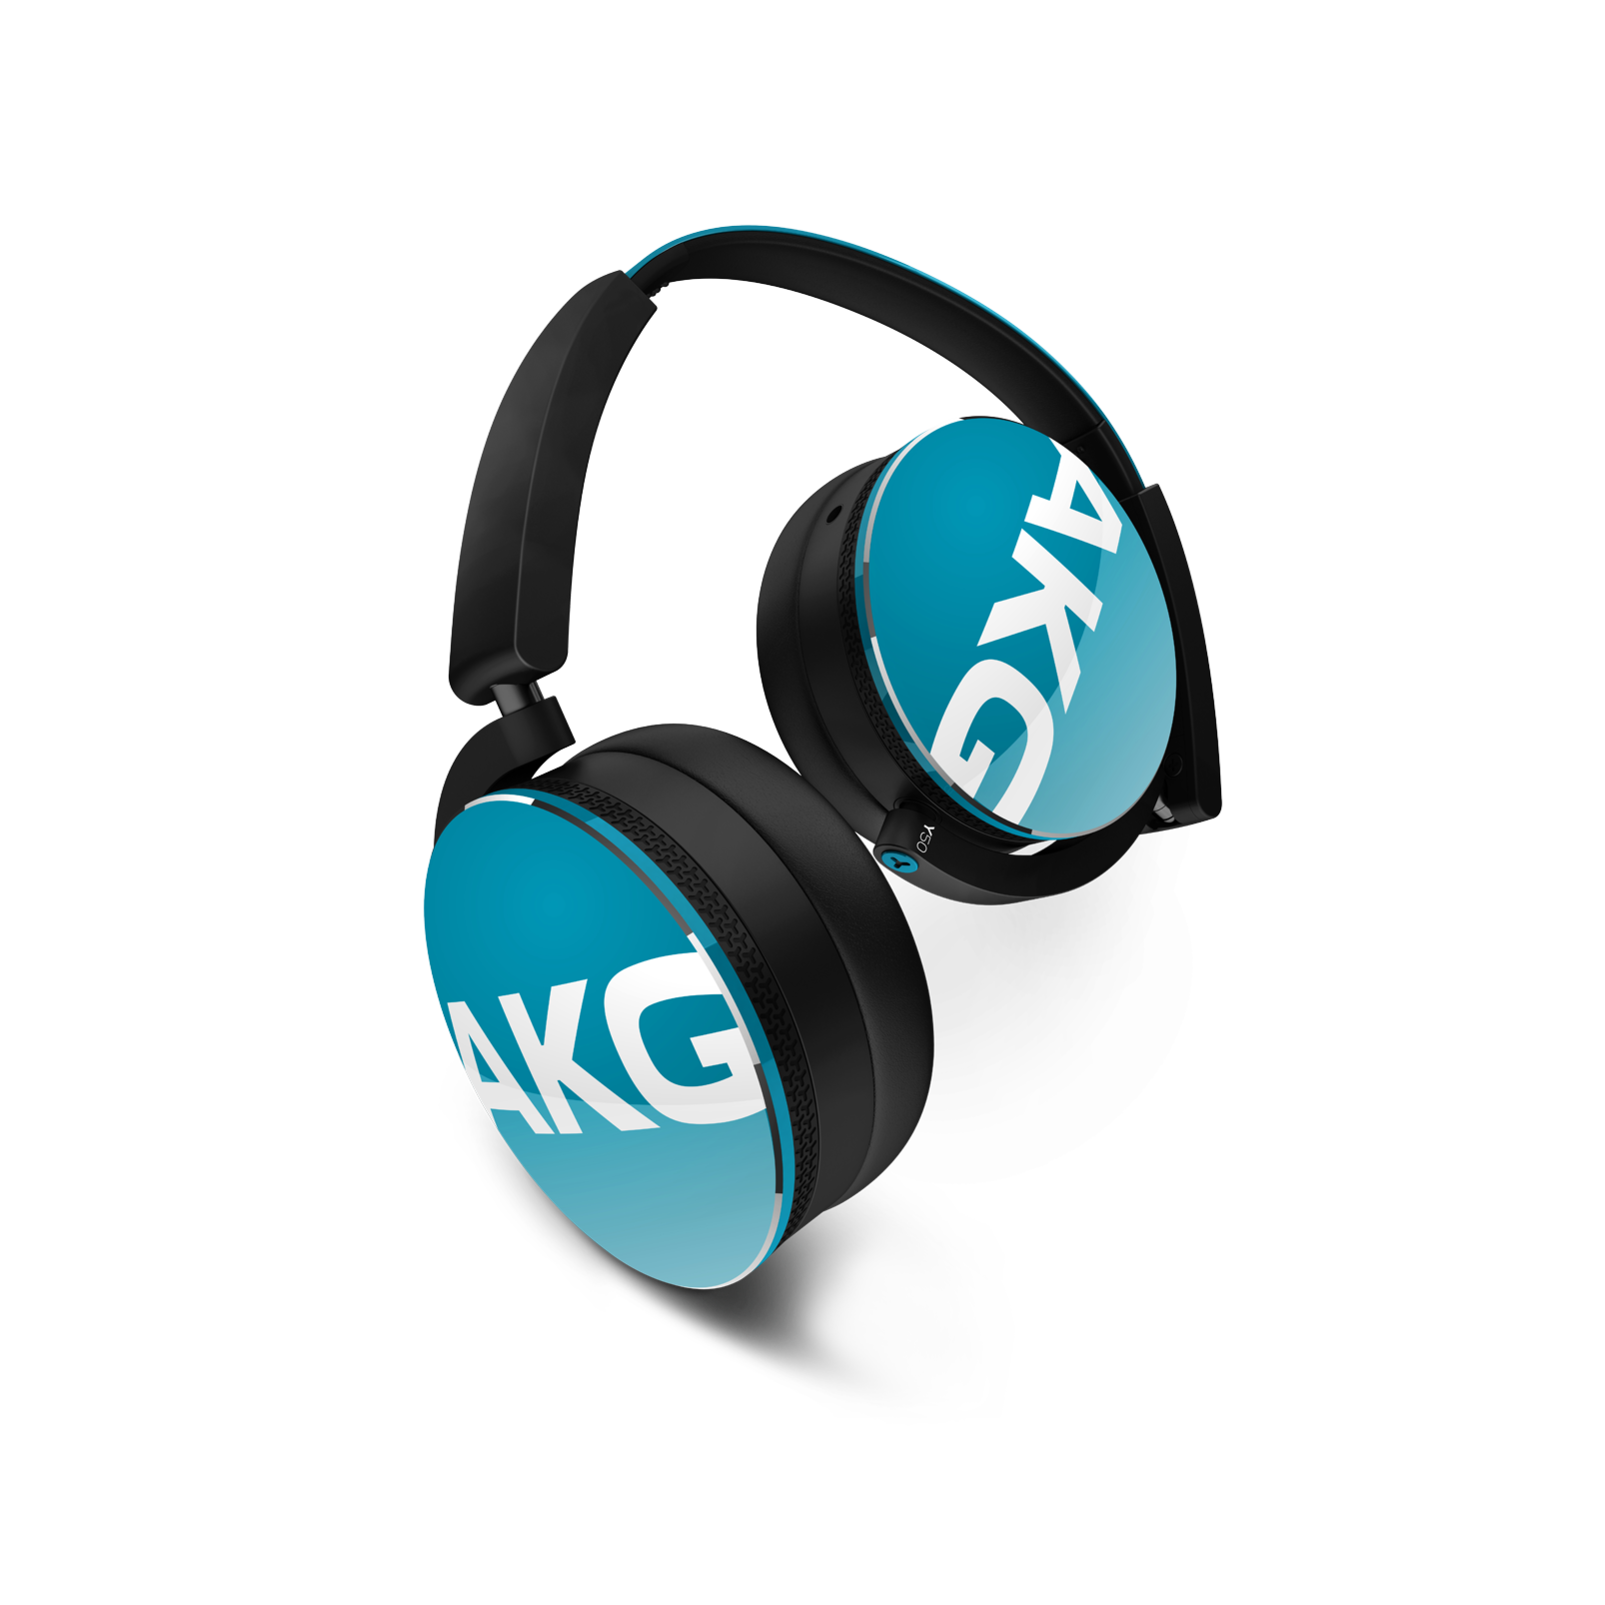 Y50 - Blue - On-ear headphones with AKG-quality sound, smart styling, snug fit and detachable cable with in-line remote/mic - Hero